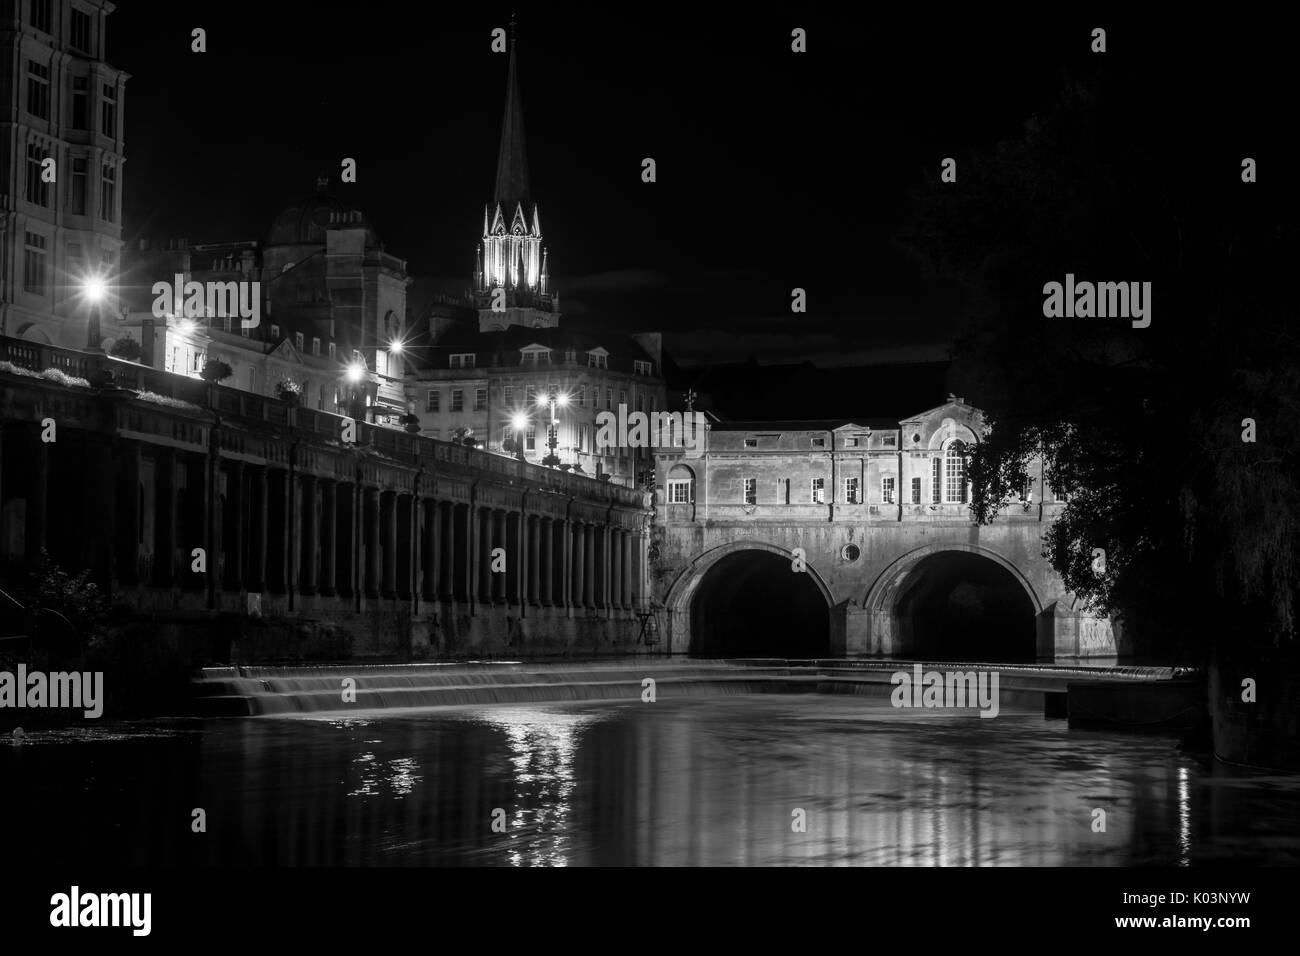 Pulteney Bridge and weir at night black and white. Palladian bridge in Bath, Somerset, UK, with River Avon flowing underneath at night Stock Photo